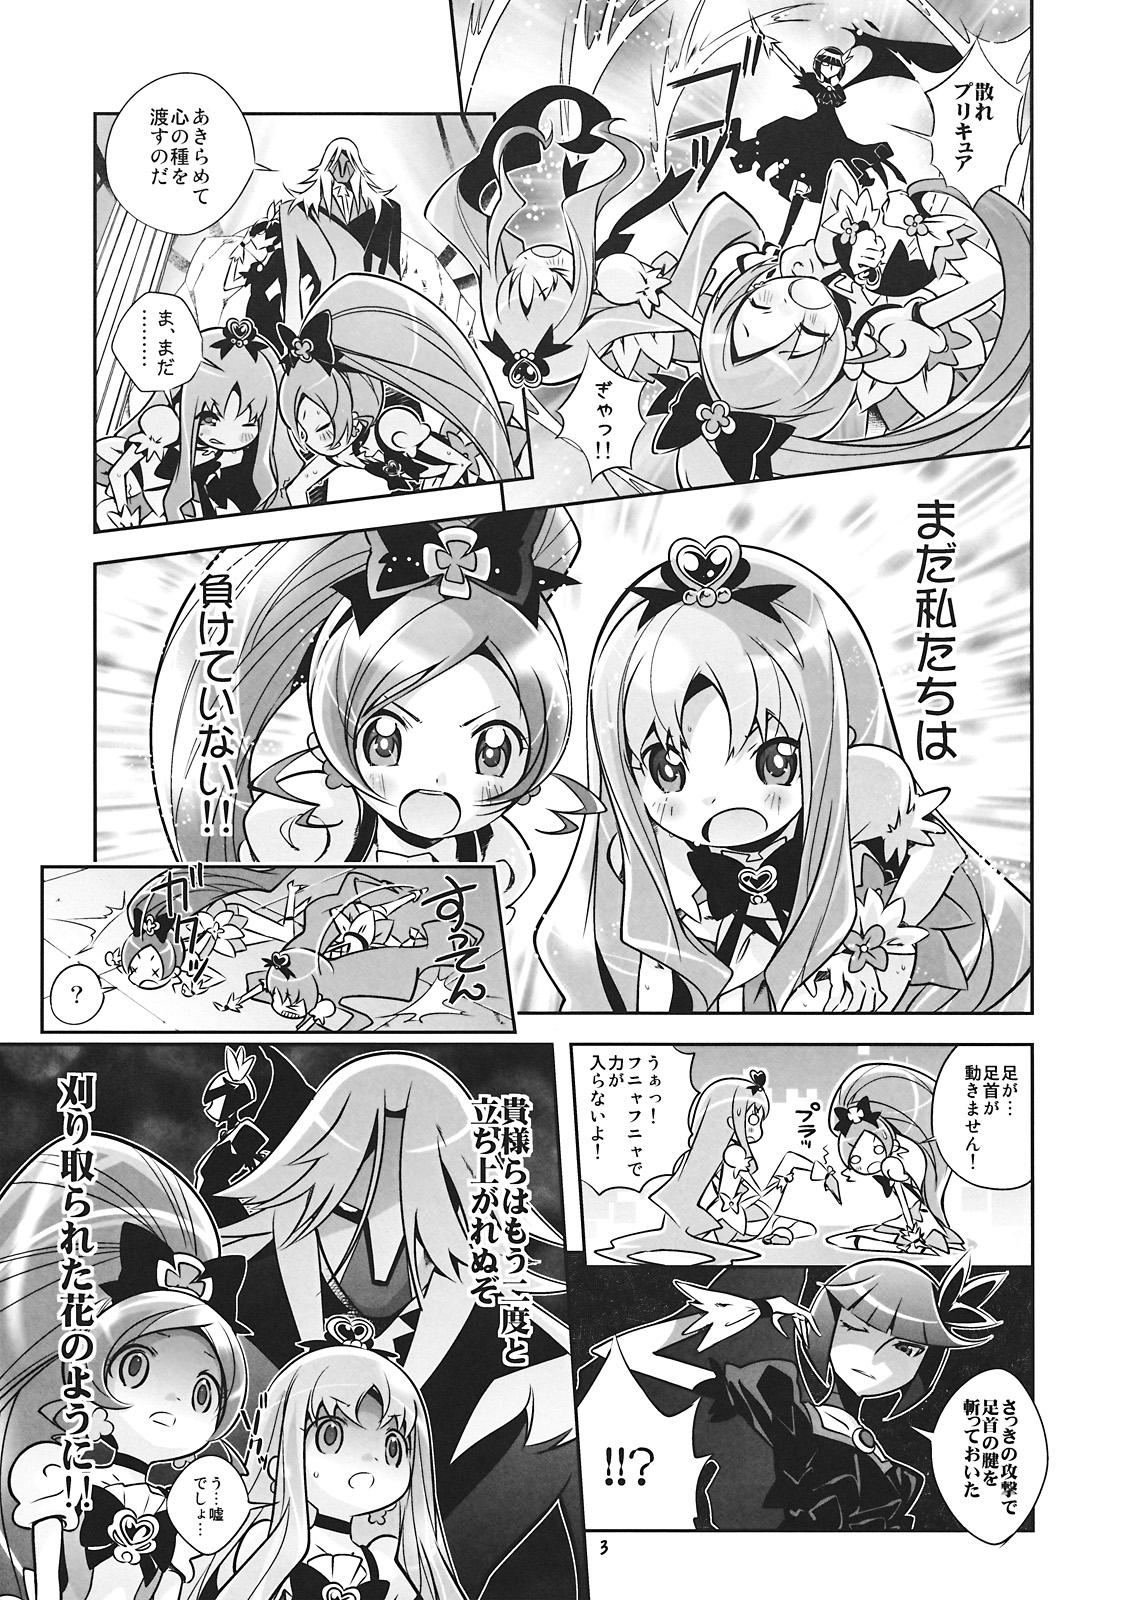 Swallow Reaped flower - Heartcatch precure Slapping - Page 3